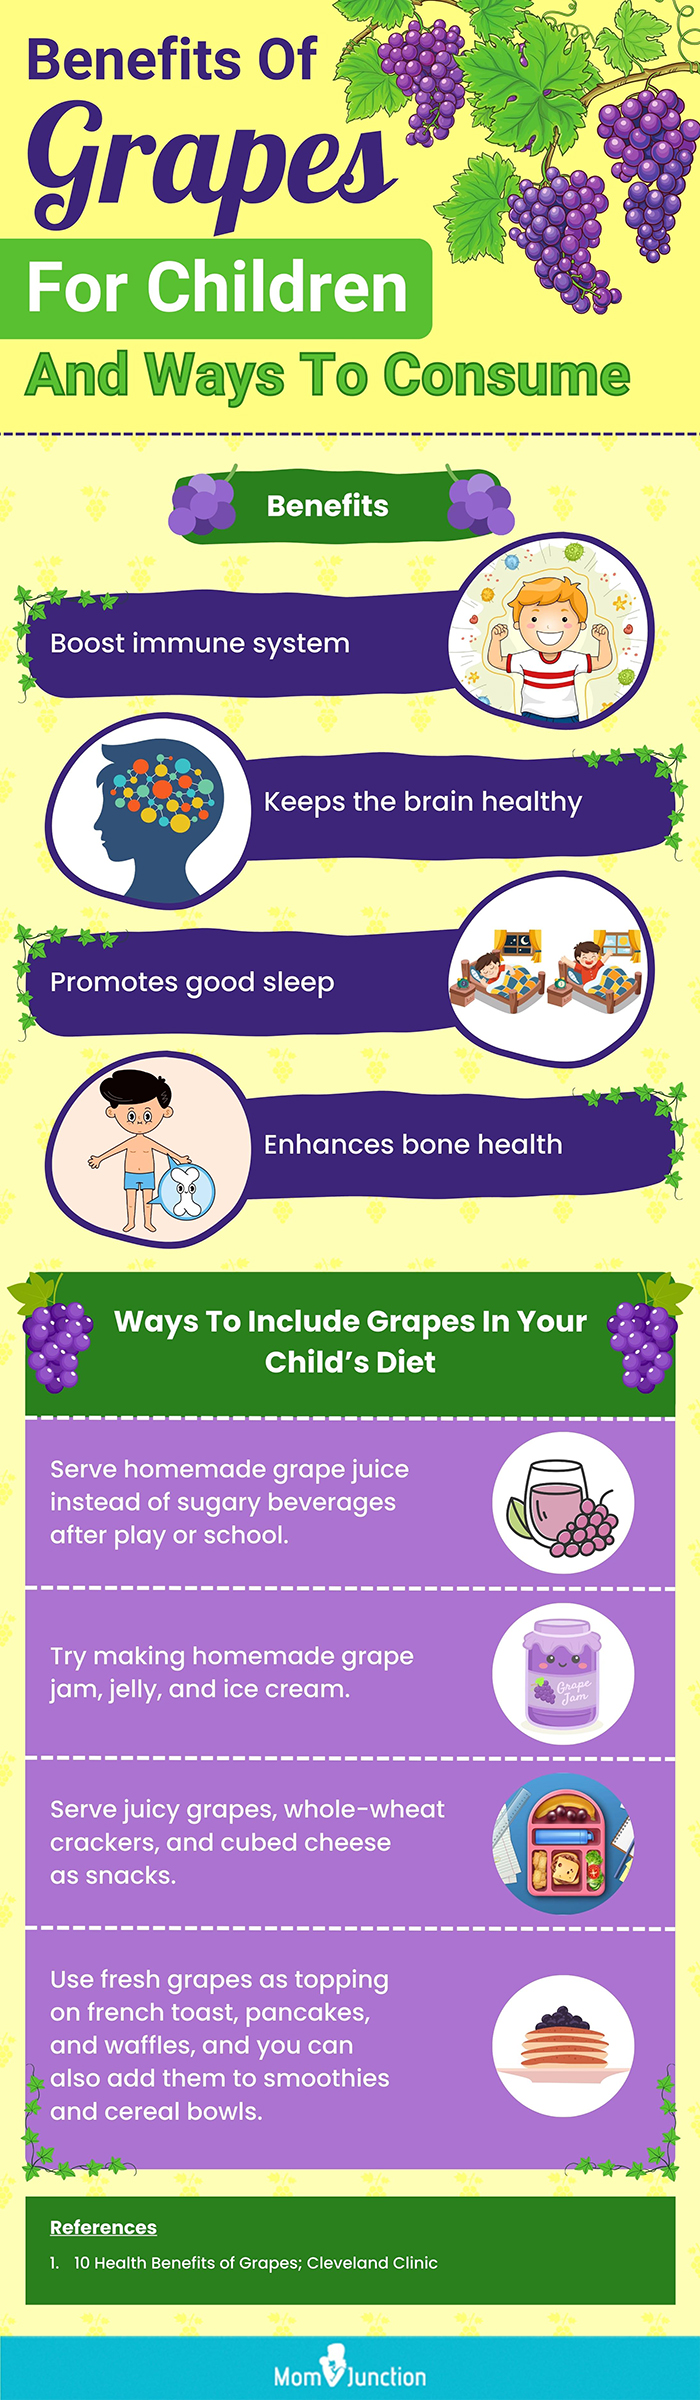 benefits of grapes for children and ways to consume (infographic)